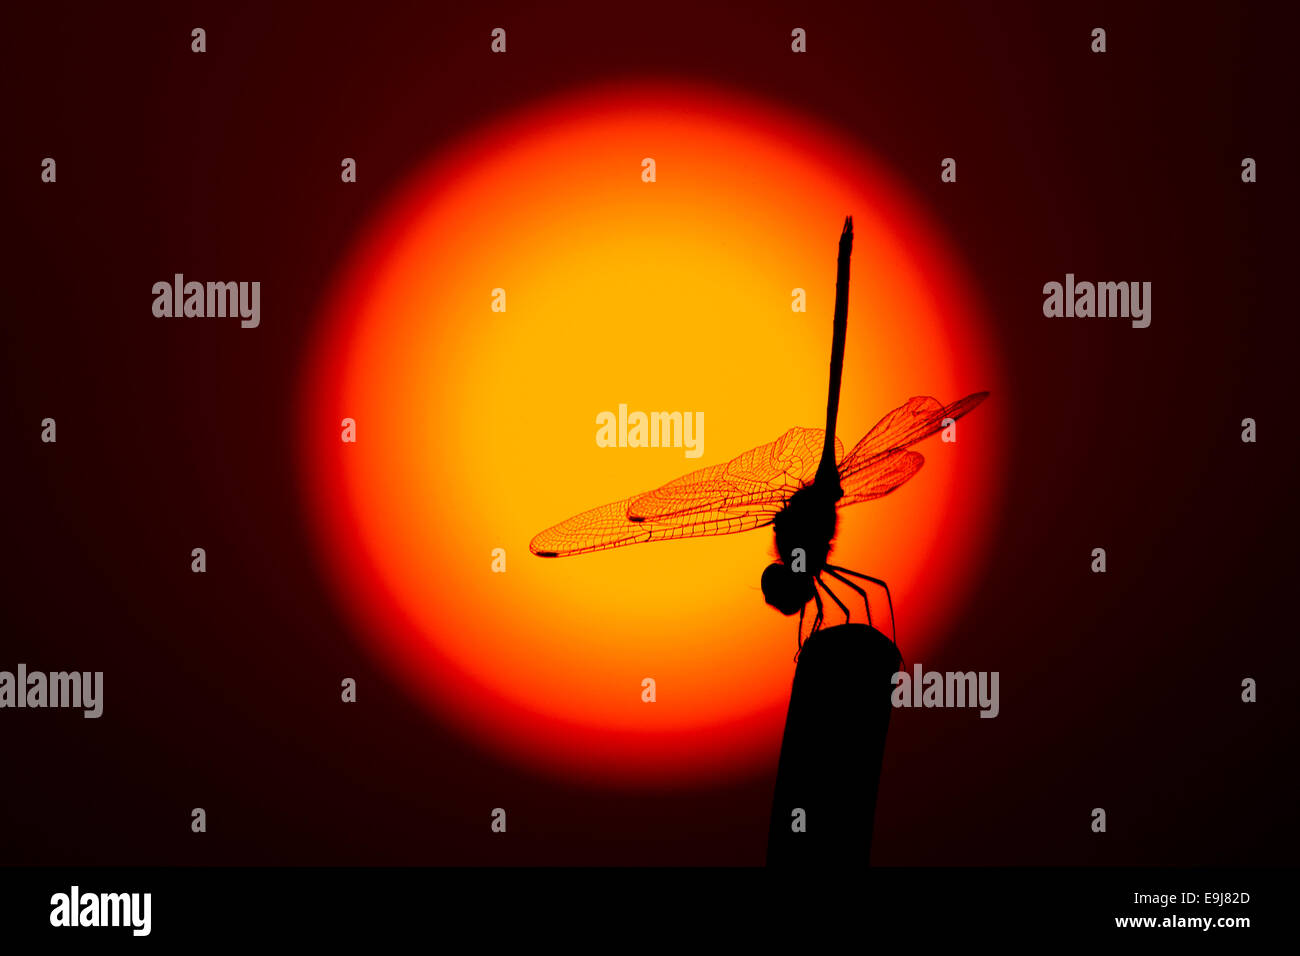 Miss Saigon, dragonfly perched on a pole in front of the setting sun. Stock Photo